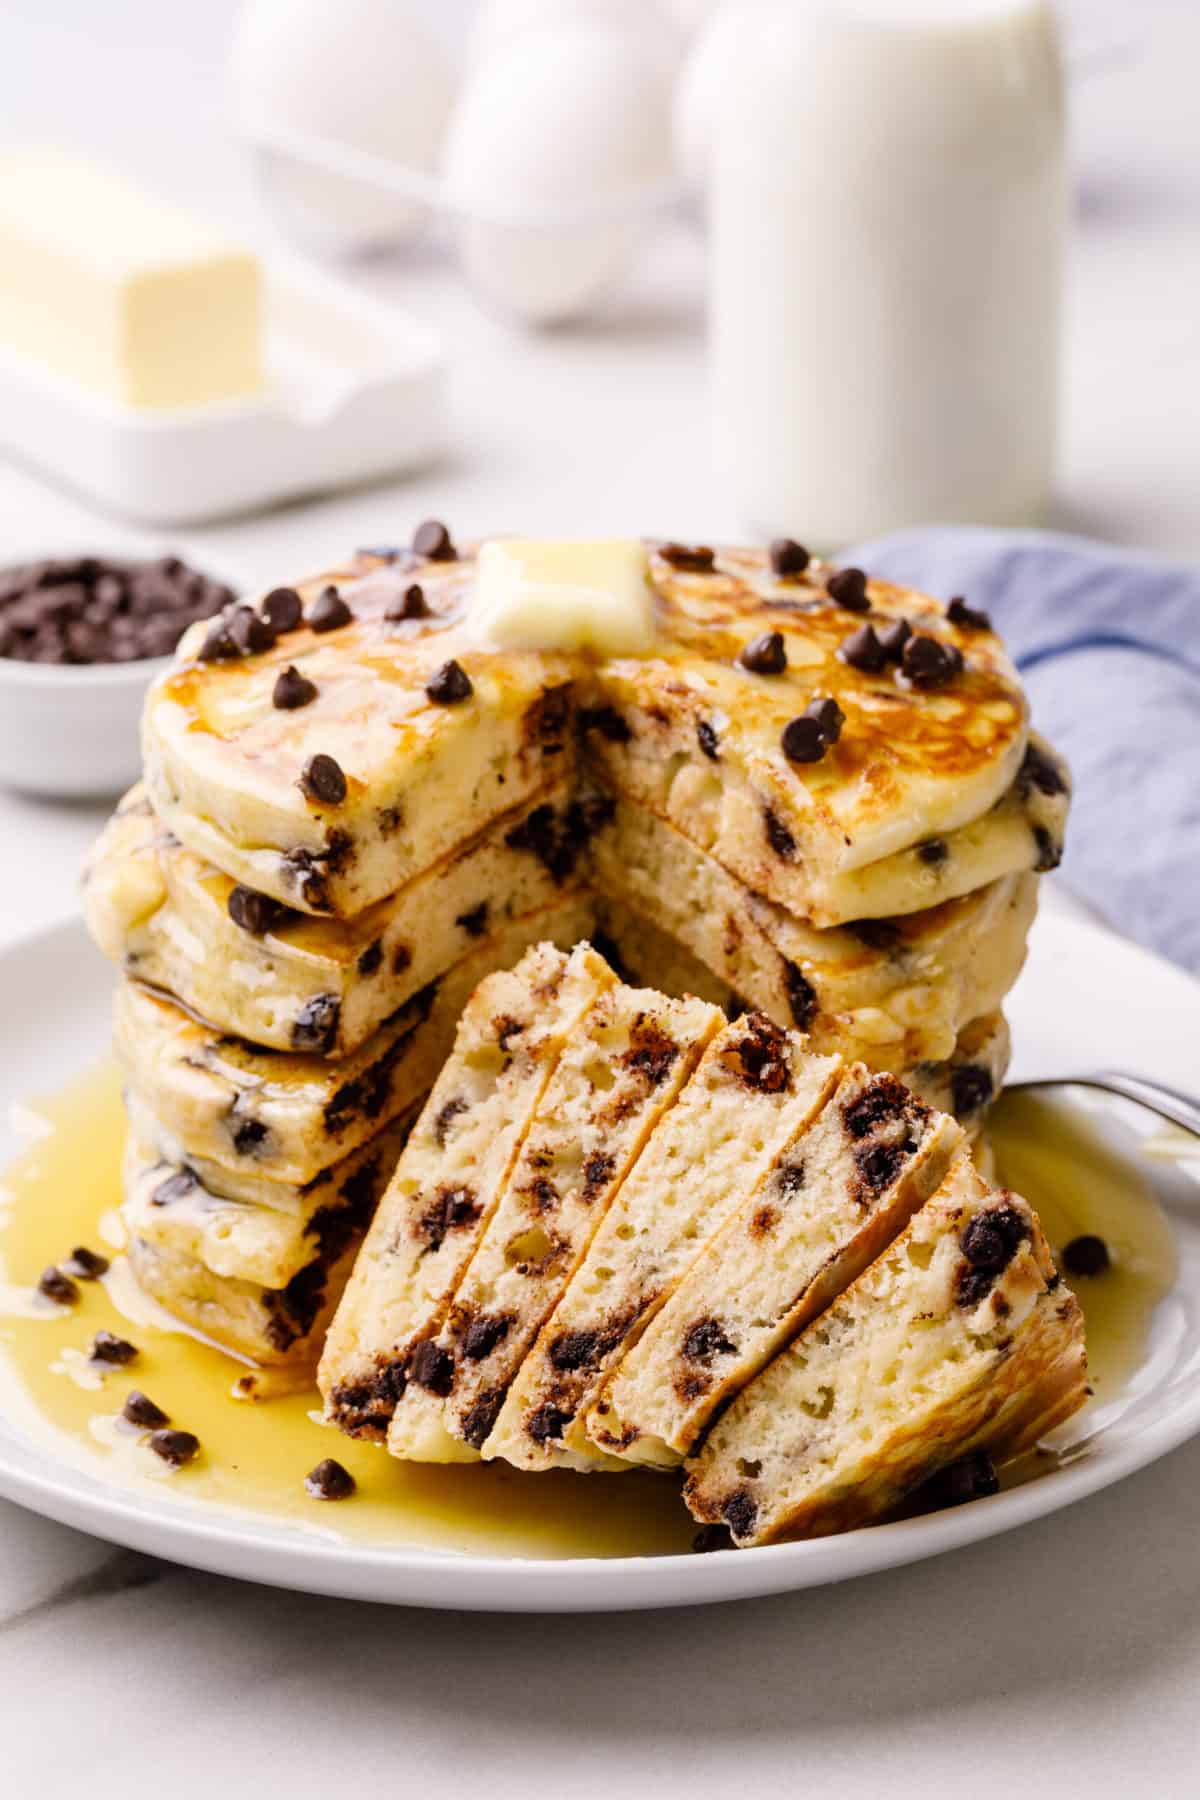 stack of chocolate chip pancakes with syrup served on a plate, pancakes are cut into to show the cross section